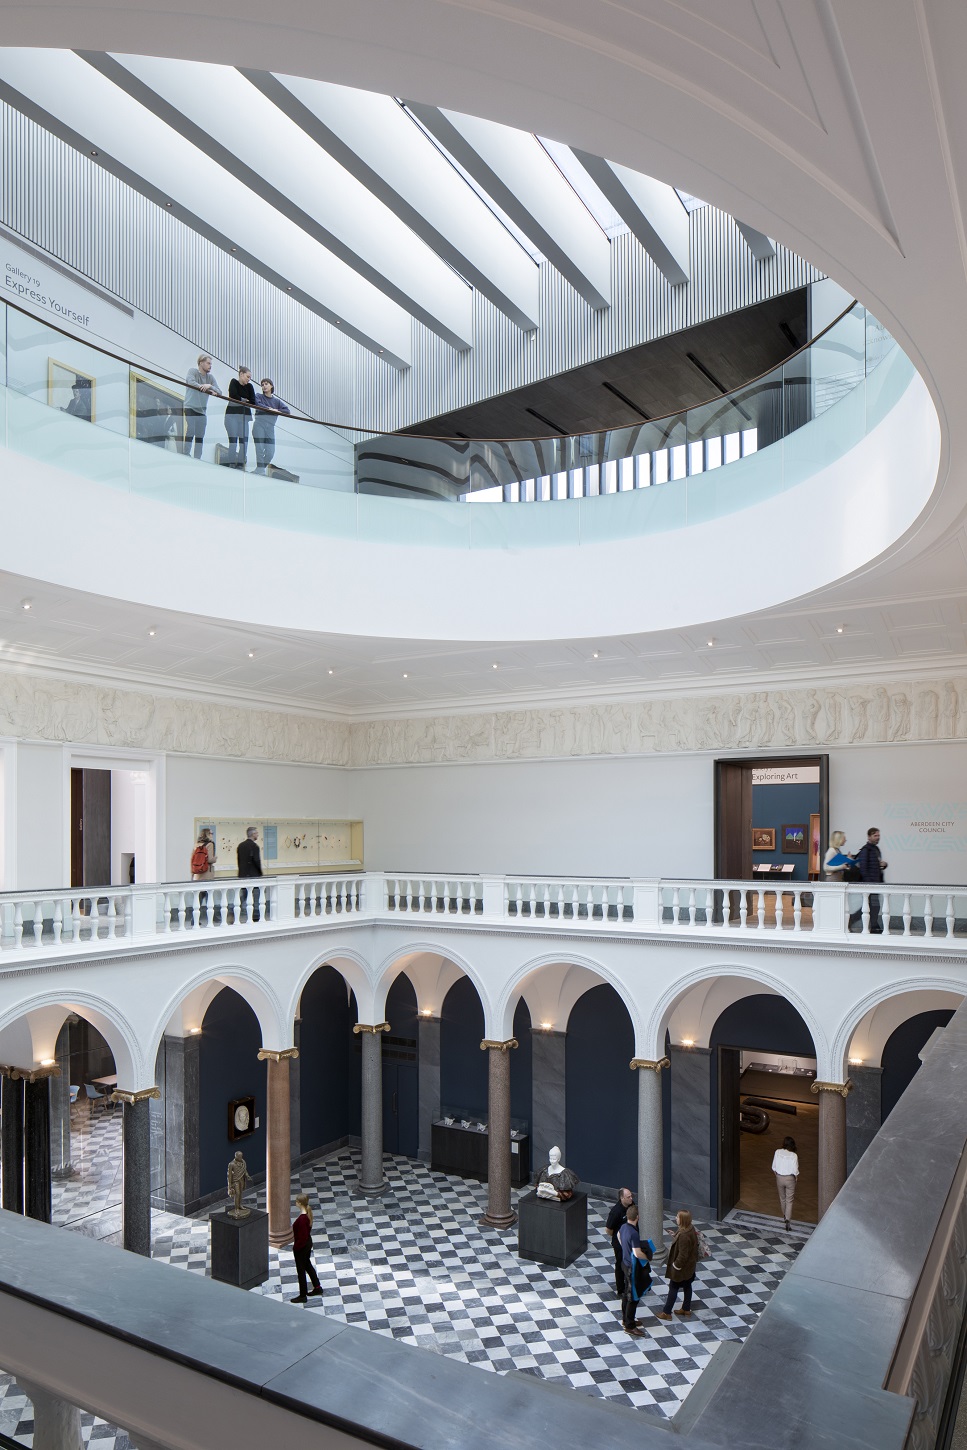 Aberdeen Art Gallery takes Andrew Doolan award for building of the year